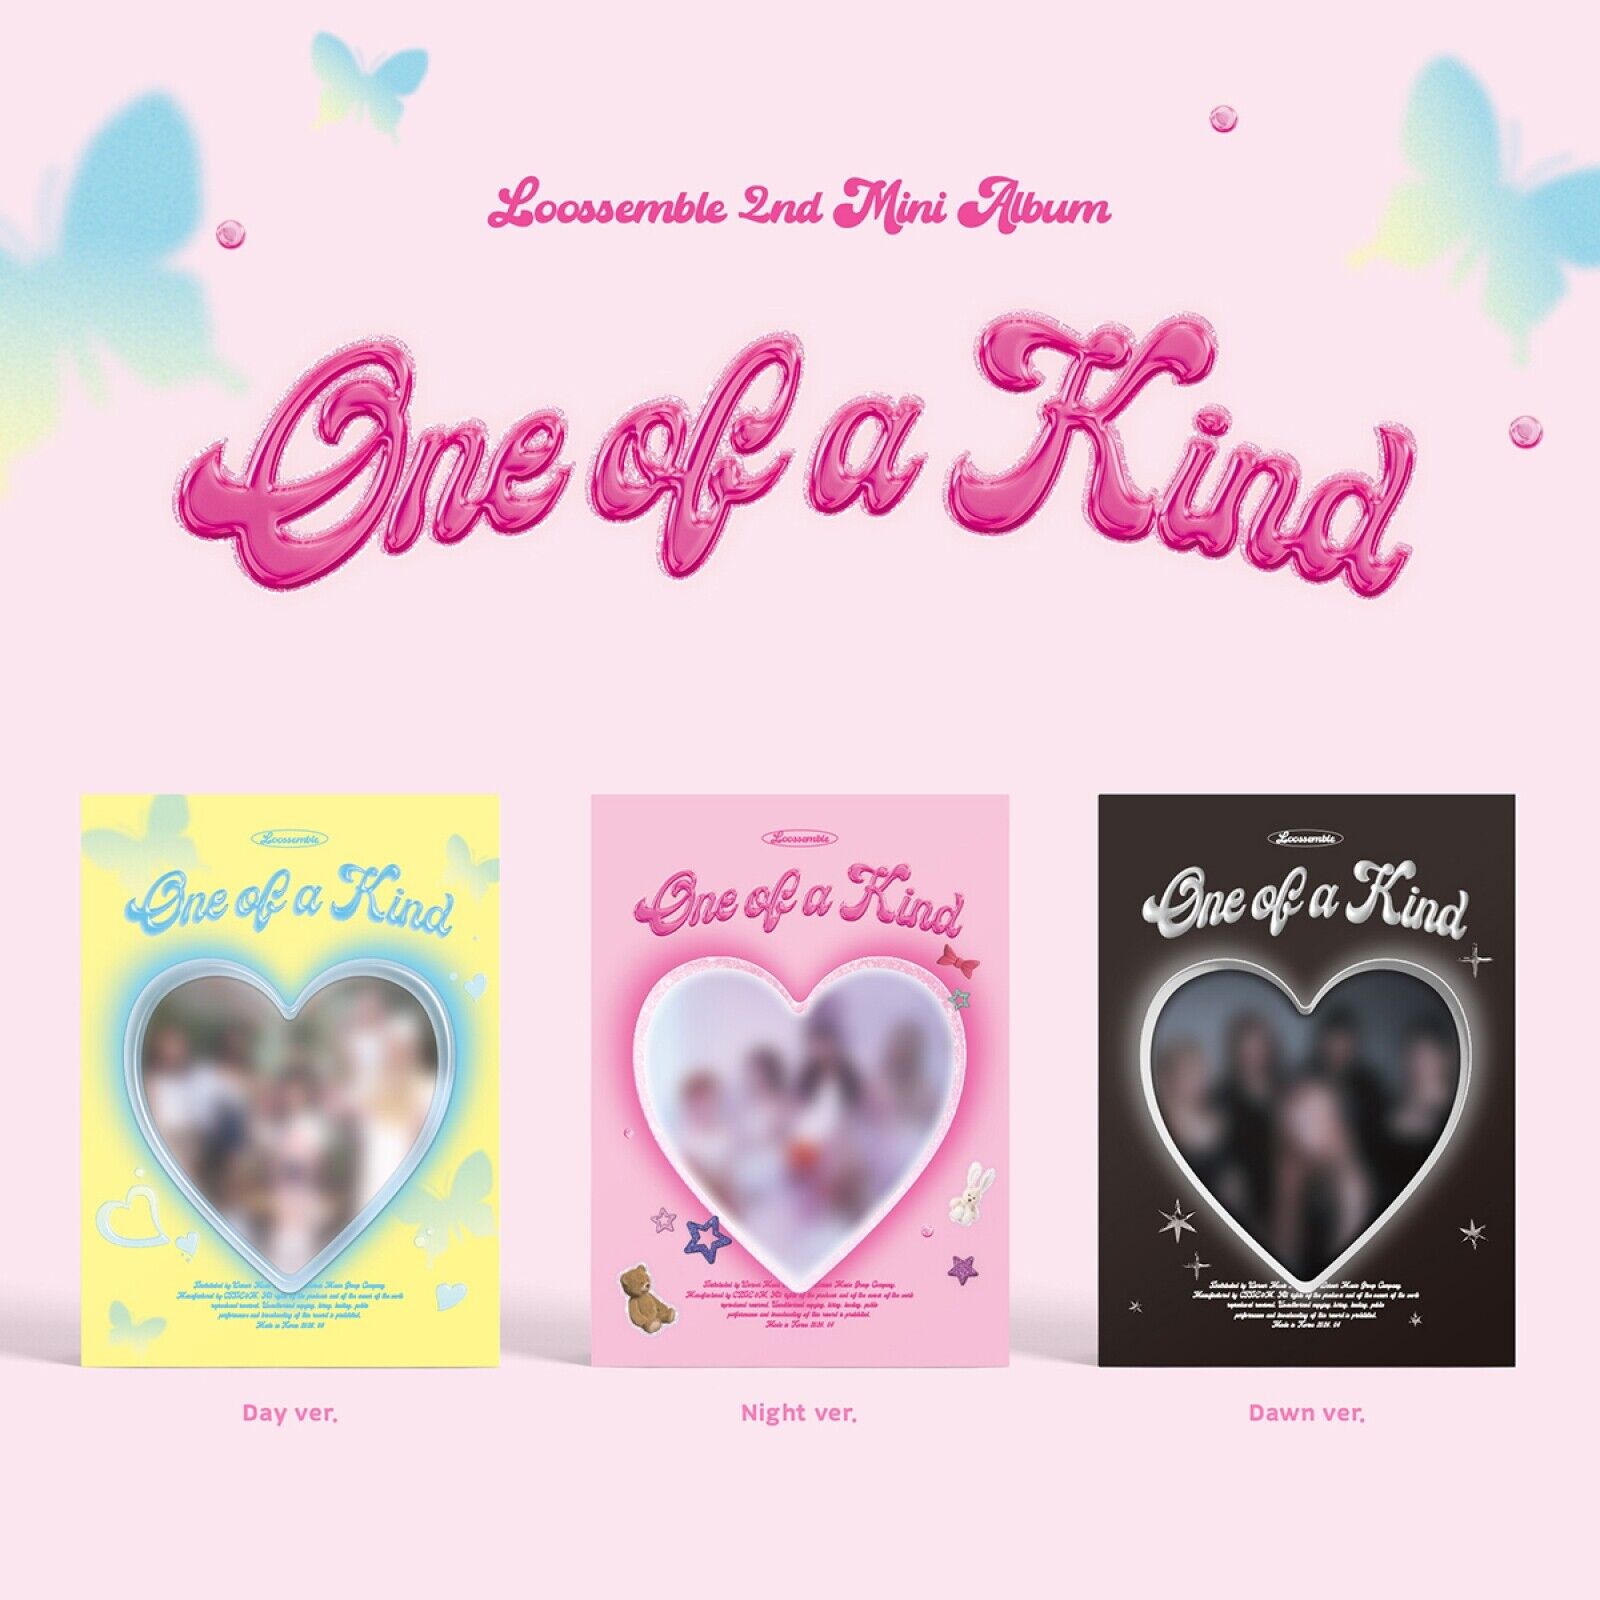 LOOSSEMBLE [ONE OF A KIND] 2nd Mini Album CD+Photo Book+Stand+4Card+Poster+GIFT